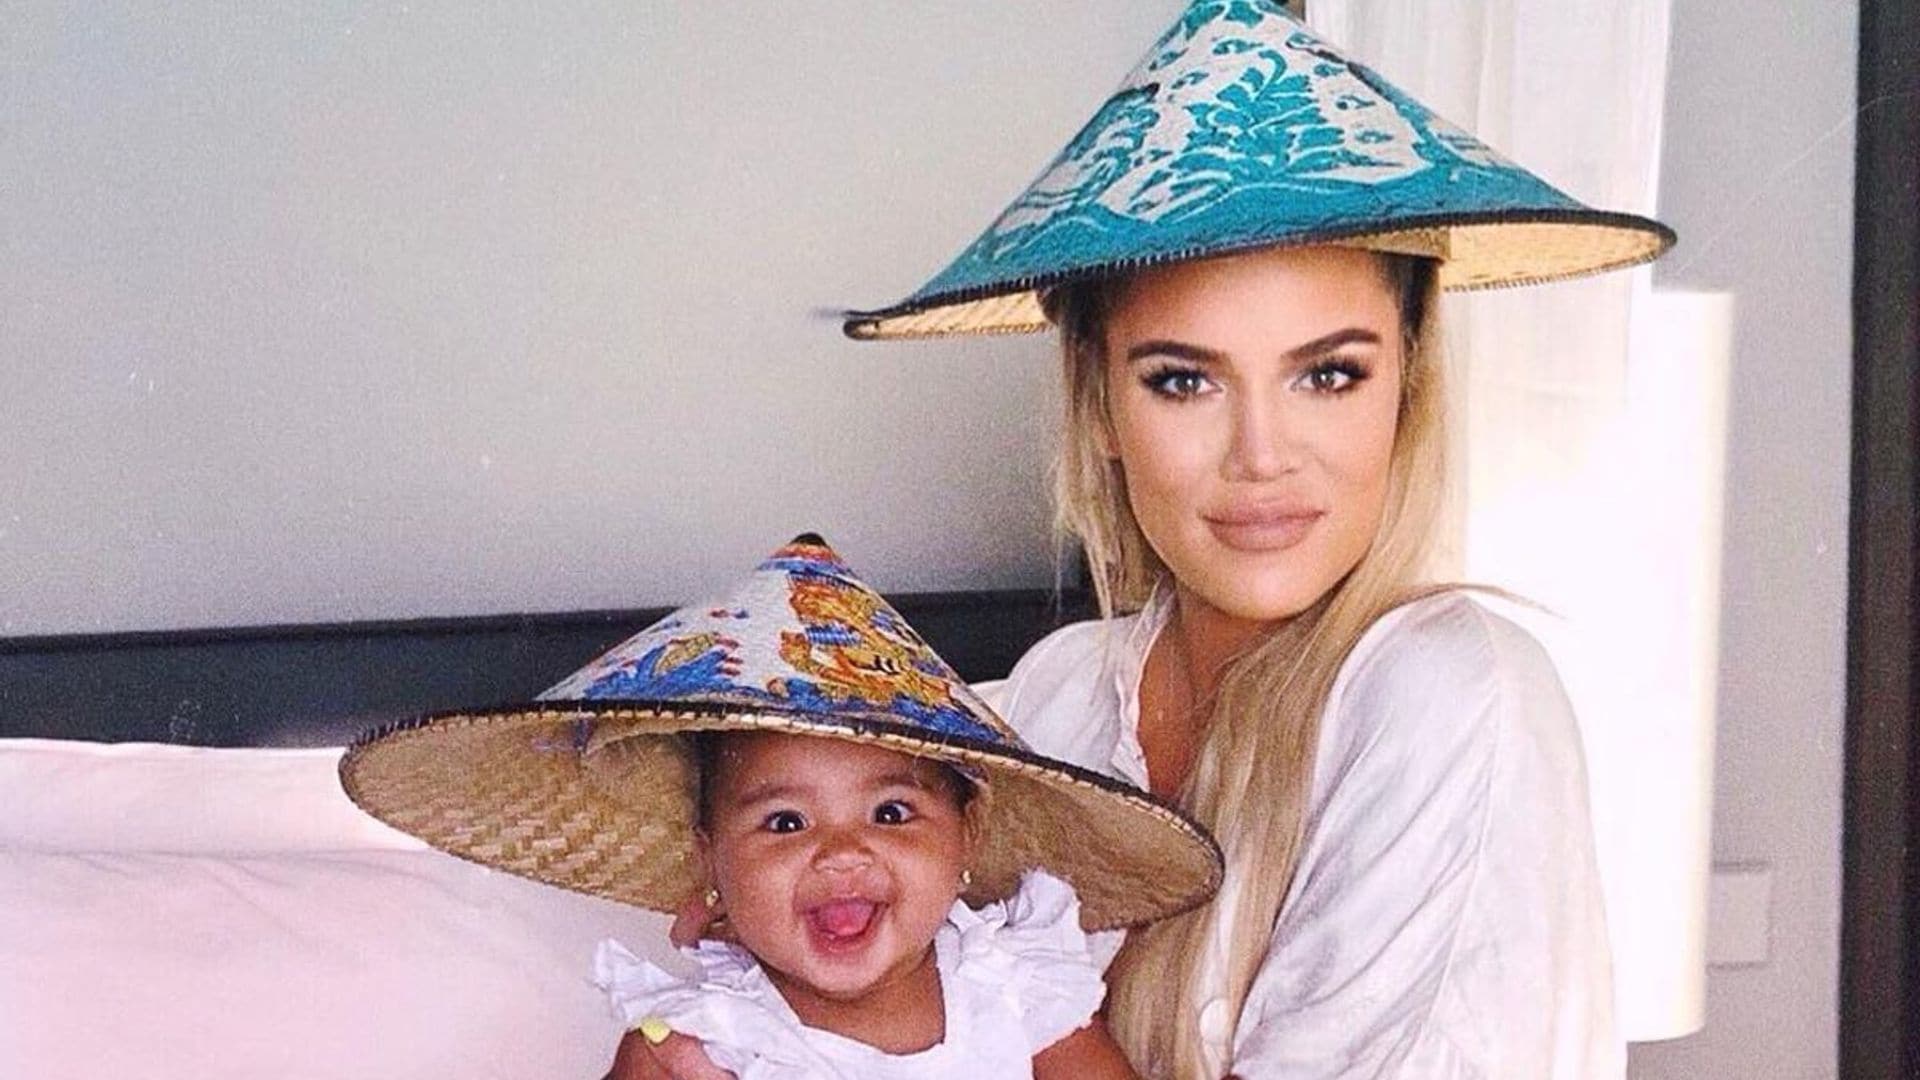 True Thompson stars in her first official photo shoot with Khloe Kardashian